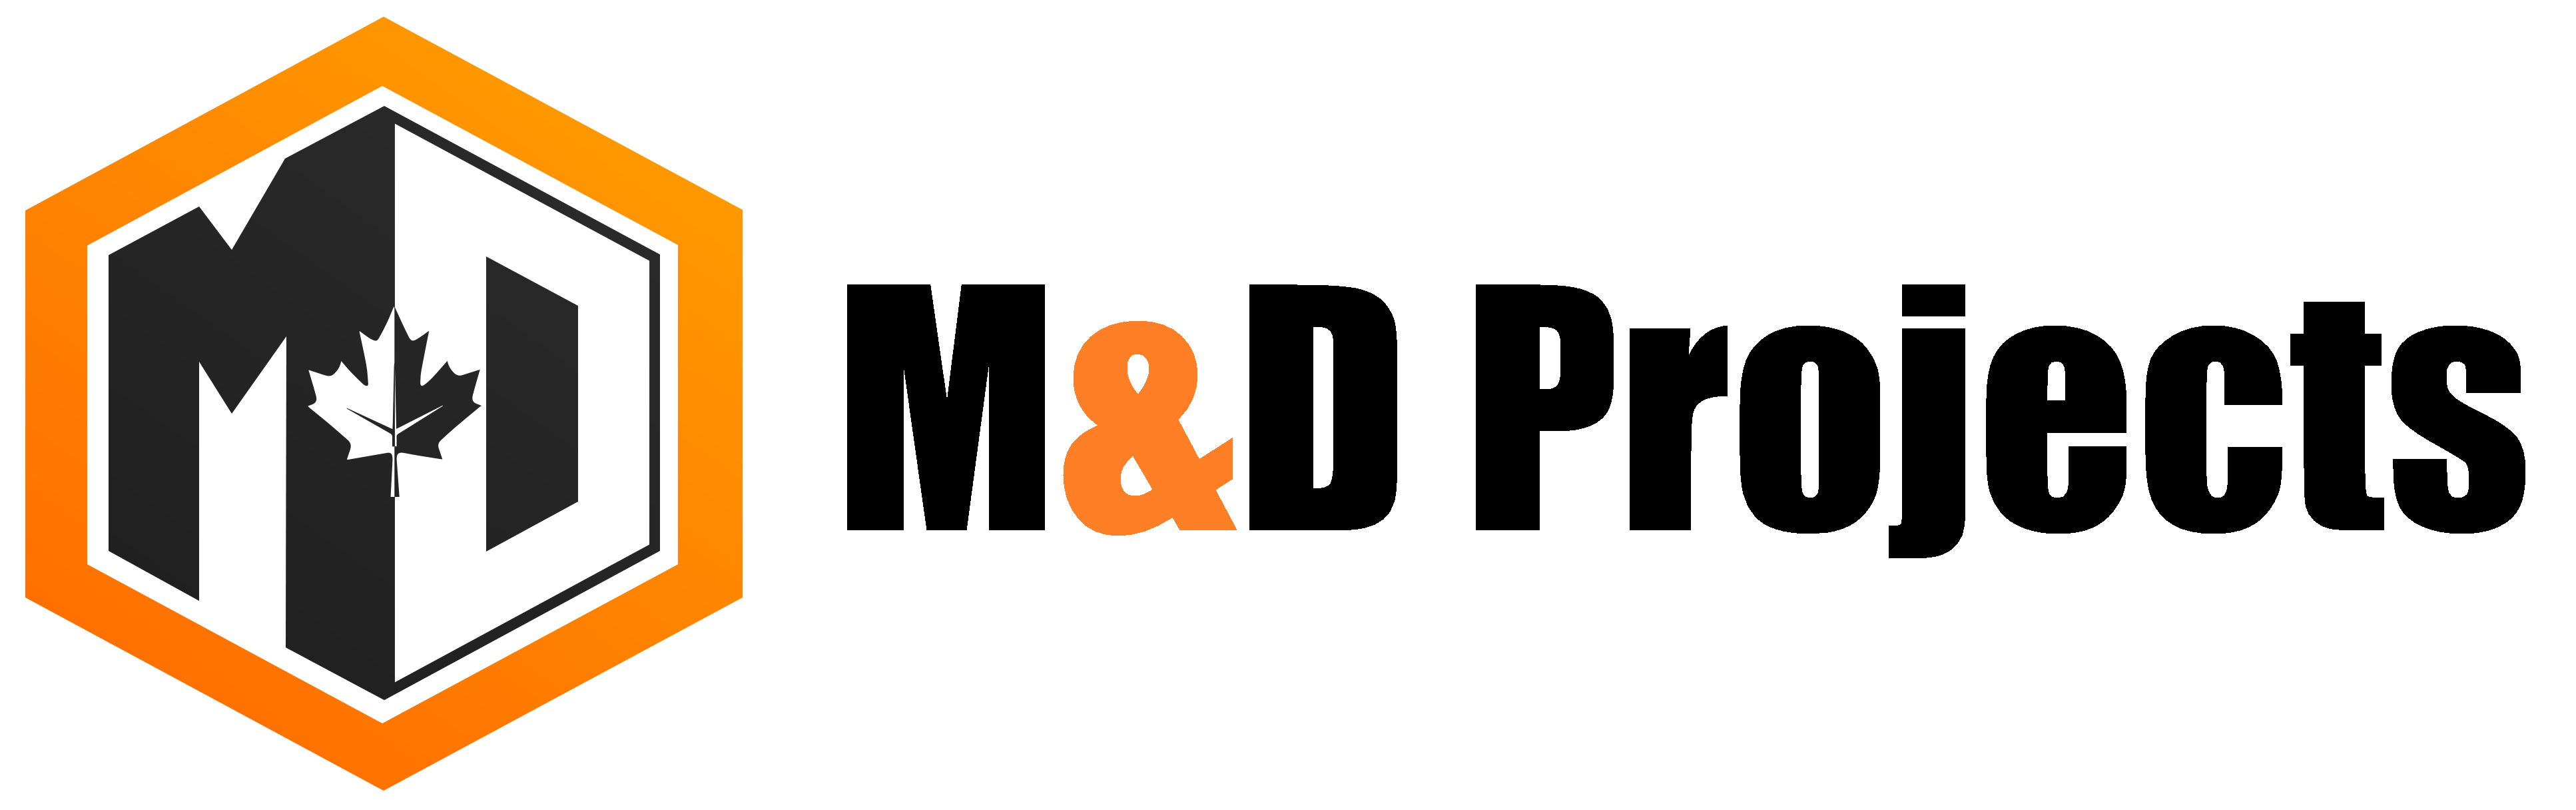 M&D Projects: Retail Store Maintenance and Facility Management